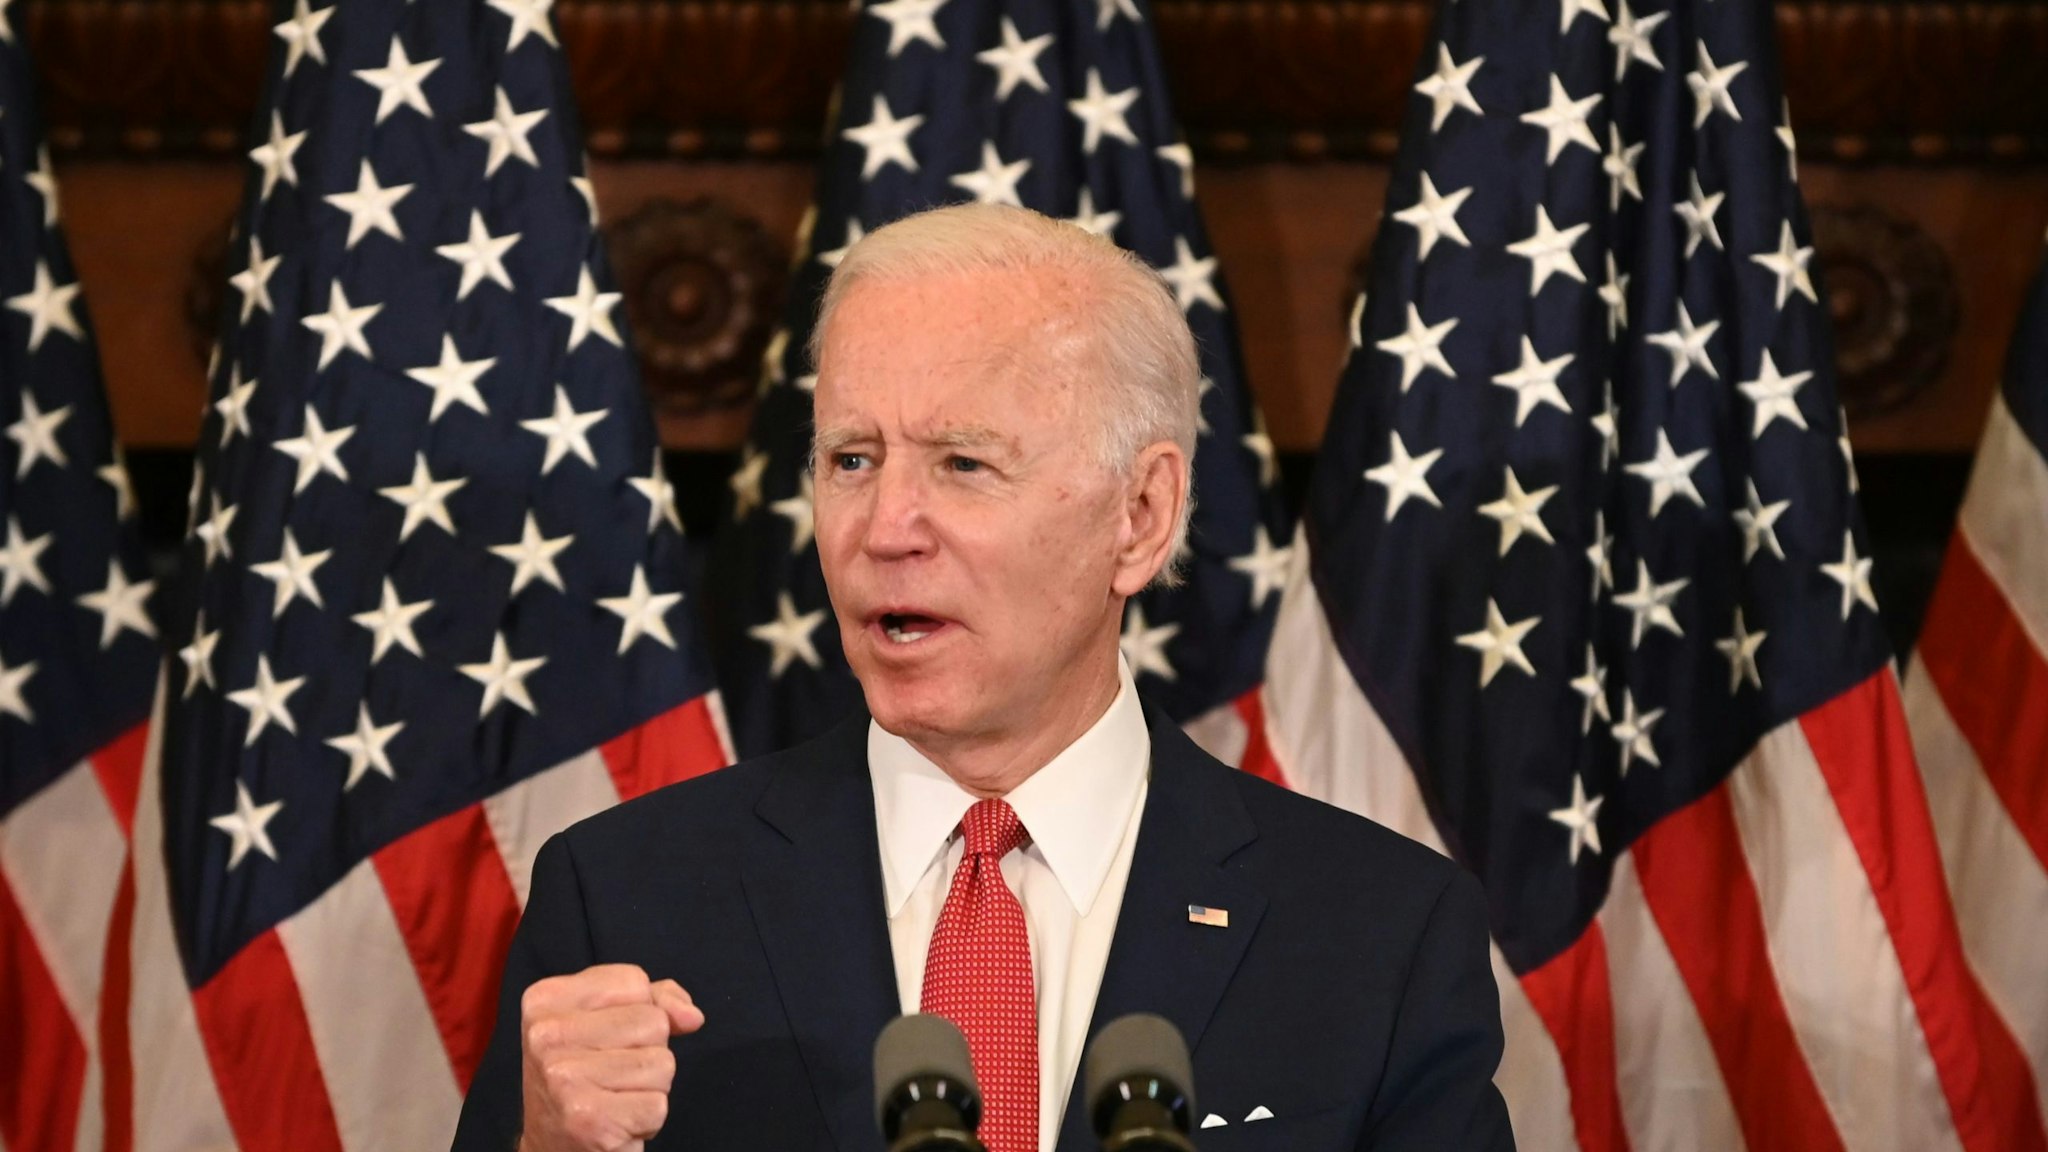 Democratic presidential candidate, and former Vice President Joe Biden speaks about the unrest across the country from Philadelphia City Hall on June 2, 2020 in Philadelphia, Pennsylvania, contrasting his leadership style with that of US President Donald Trump, and calling George Floyds death a wake-up call for our nation. (Photo by JIM WATSON / AFP) (Photo by JIM WATSON/AFP via Getty Images)